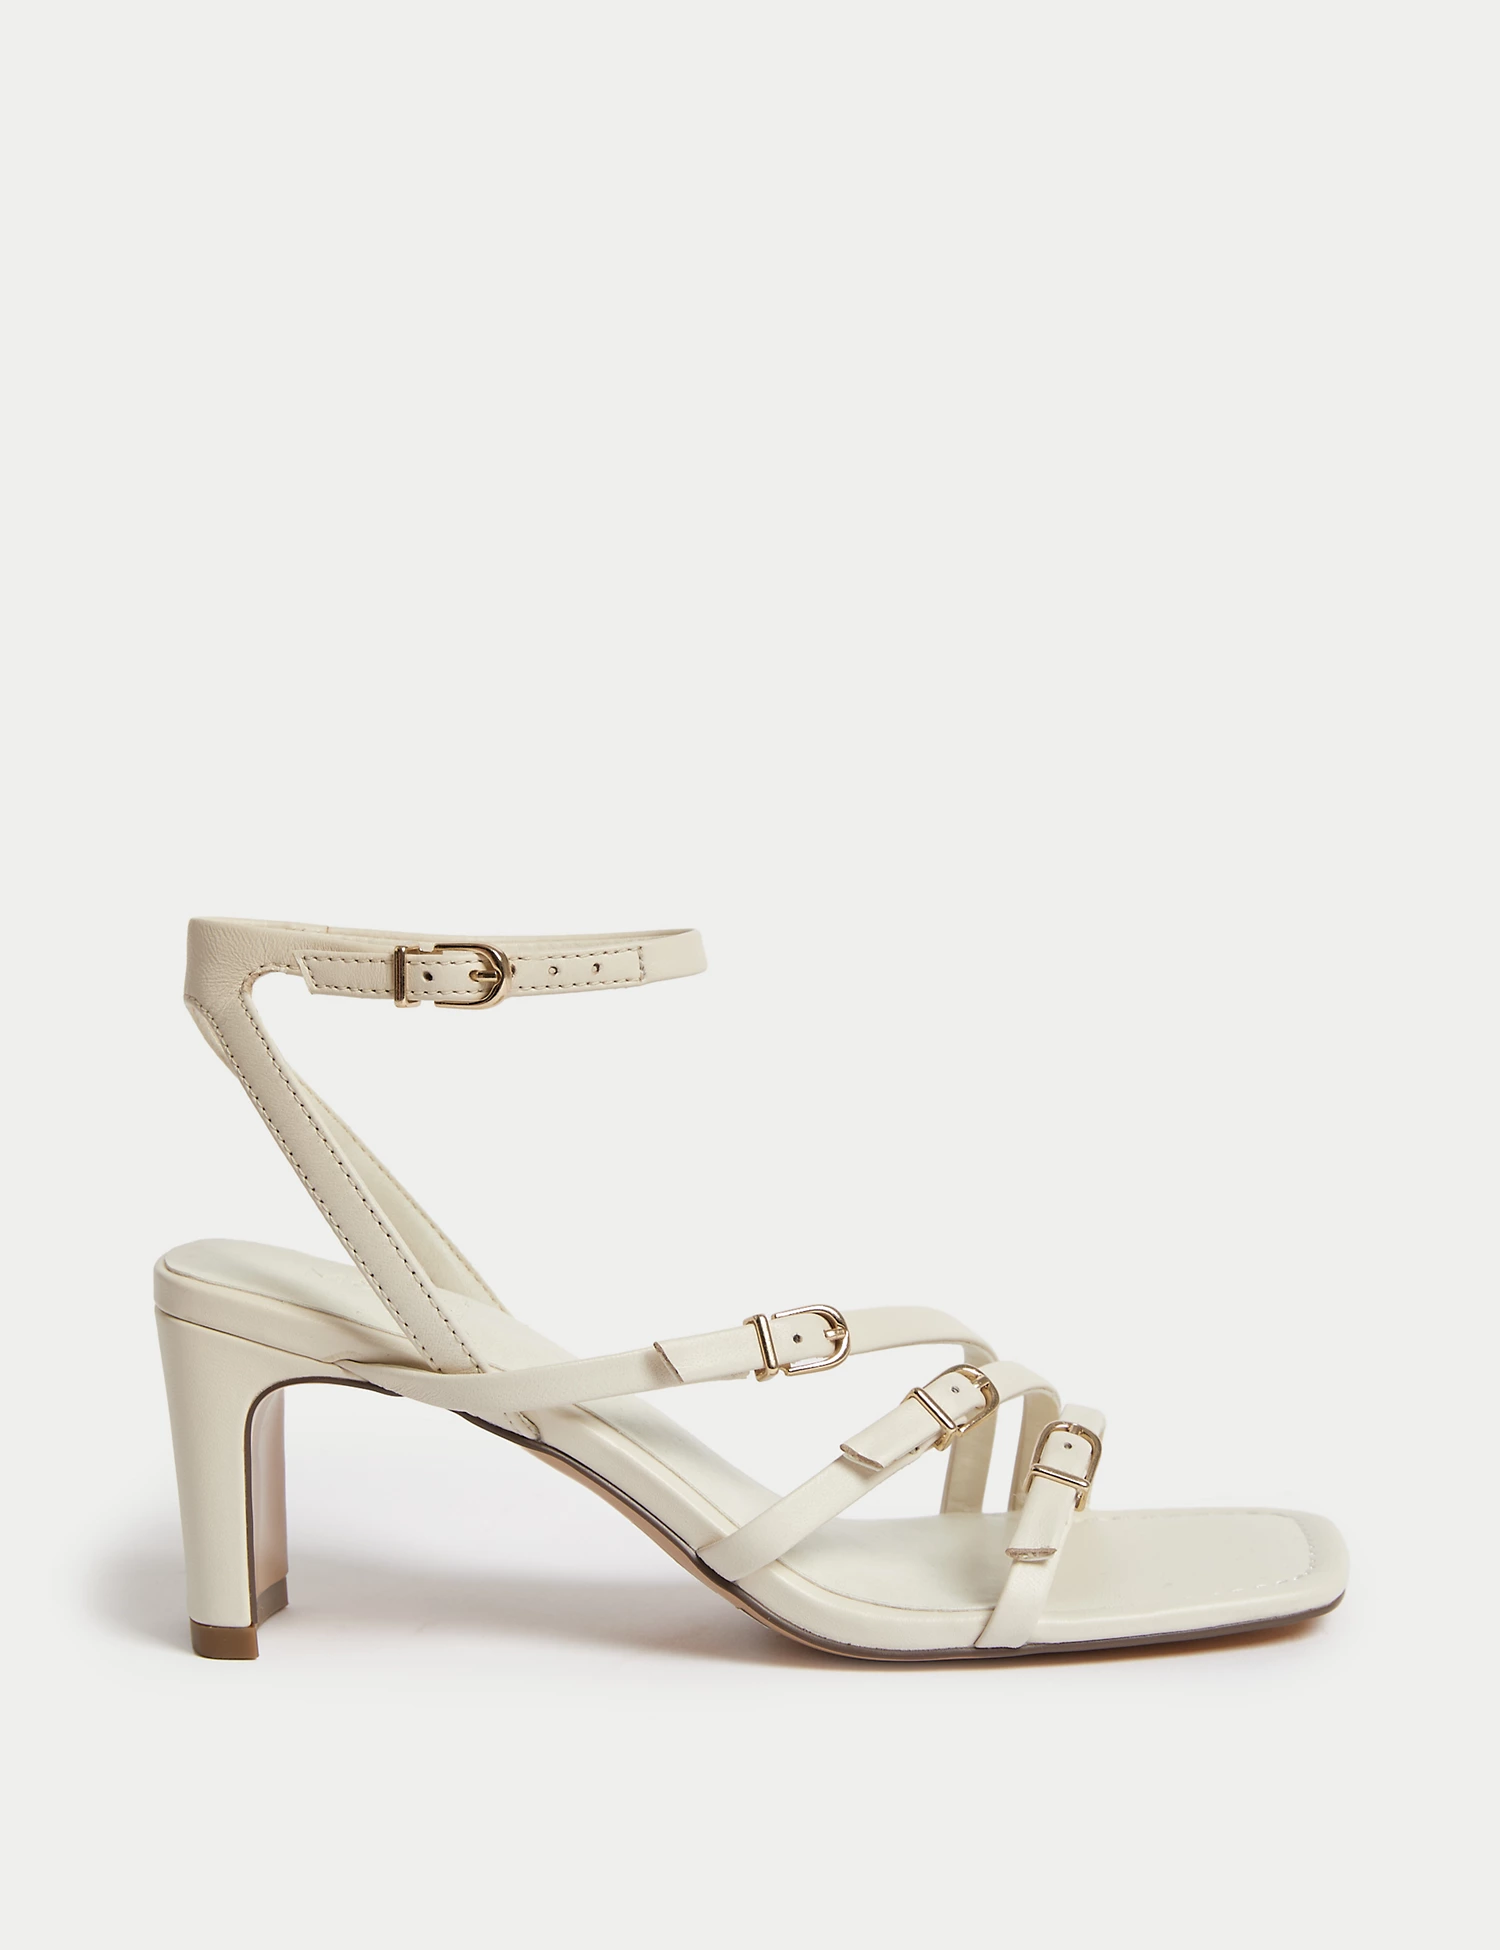 M&S Sandals Trends, Strappy Sandals